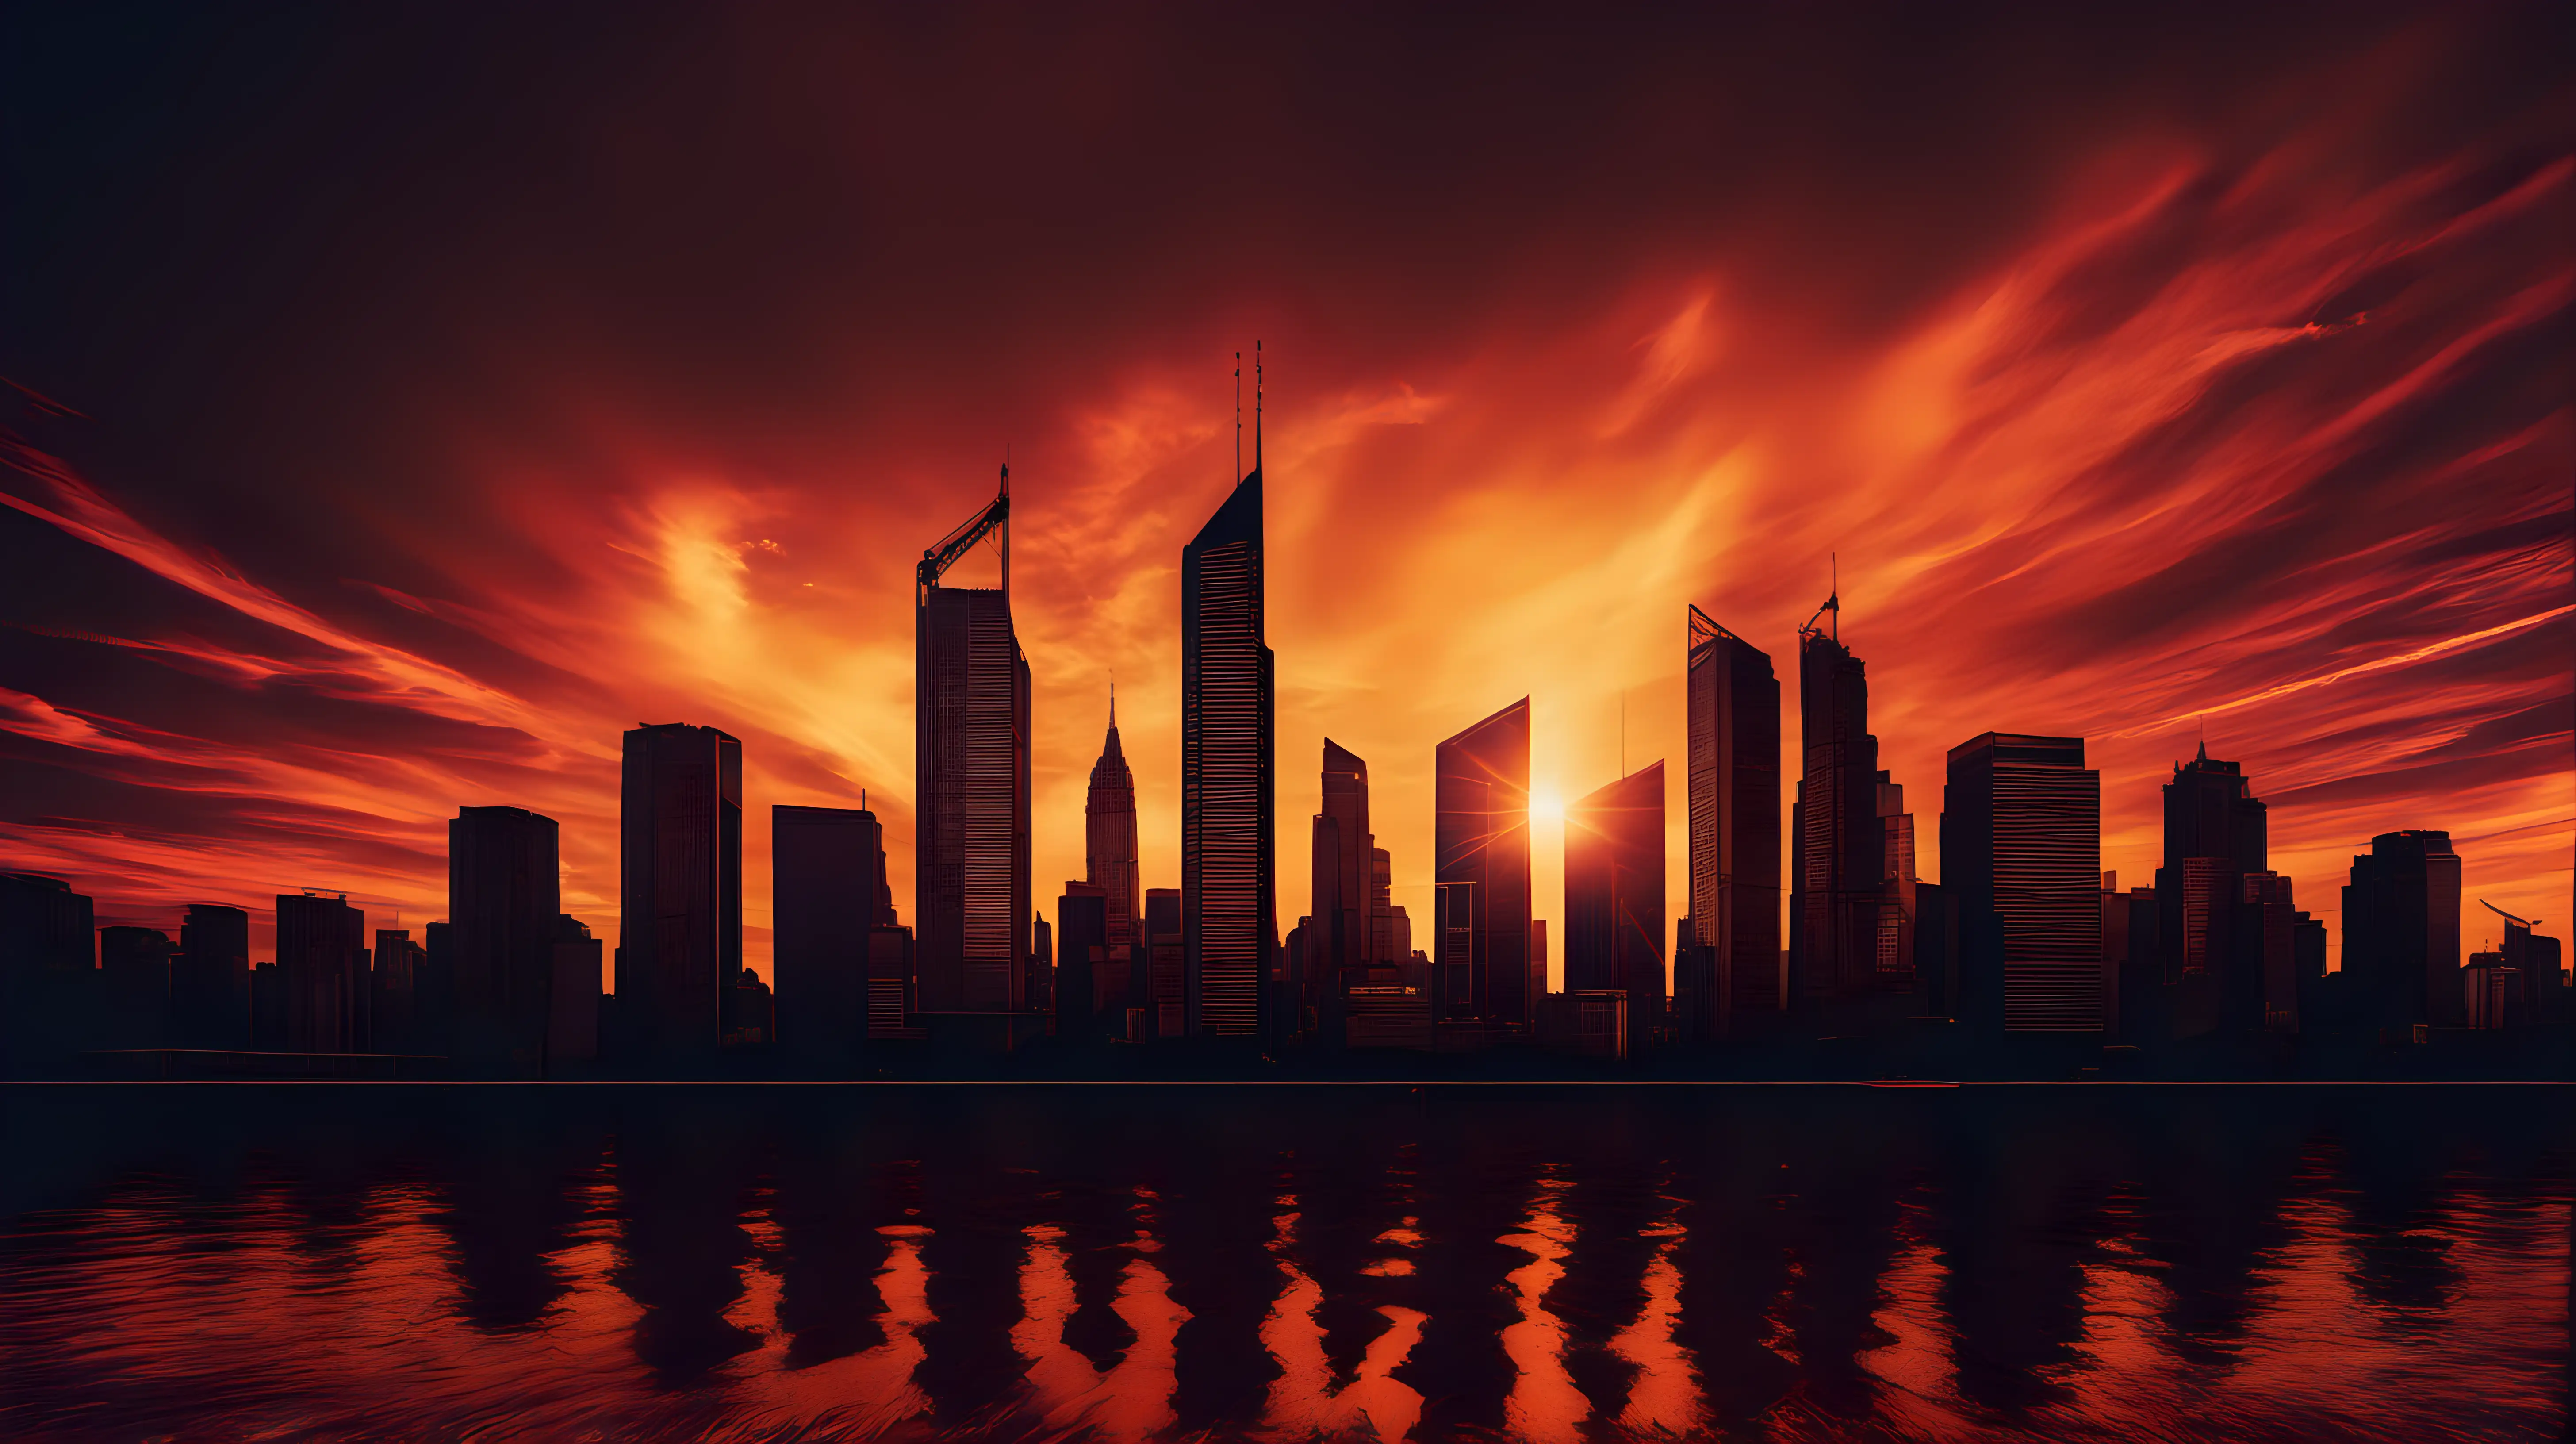 Vibrant Cityscape Majestic Skyscrapers Silhouetted by Fiery Sunset